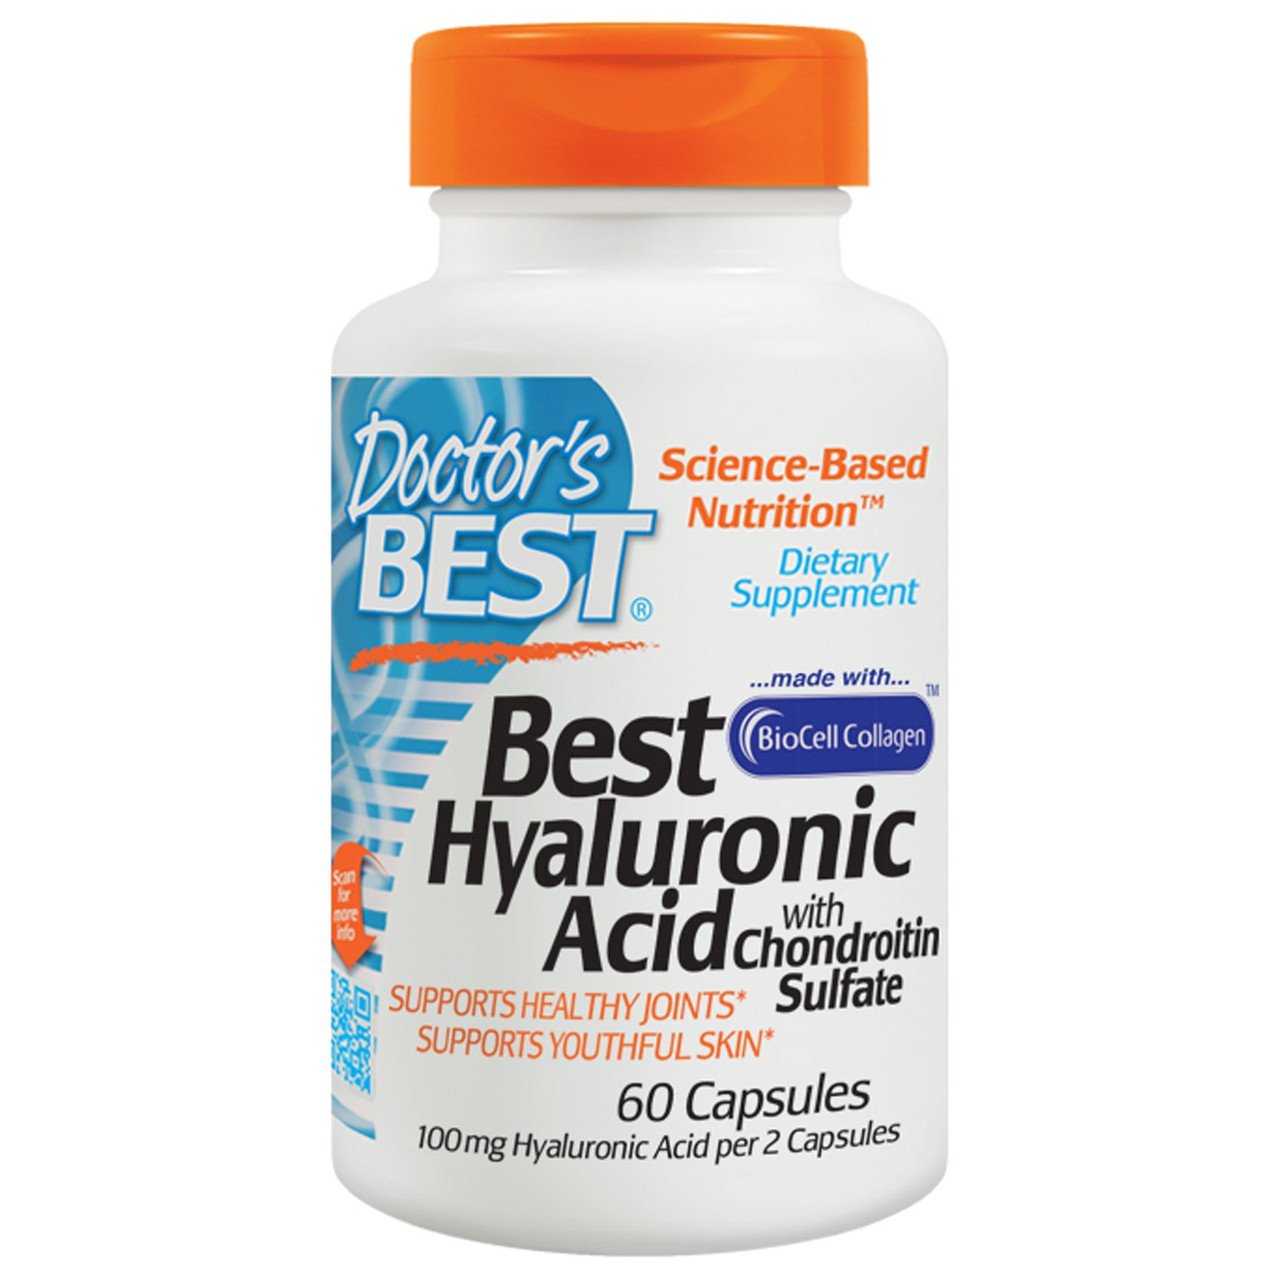 Doctor's BEST Doctor's Best Best Hyaluronic Acid+Chondroitin Sulfate 60 caps, , 60 шт.